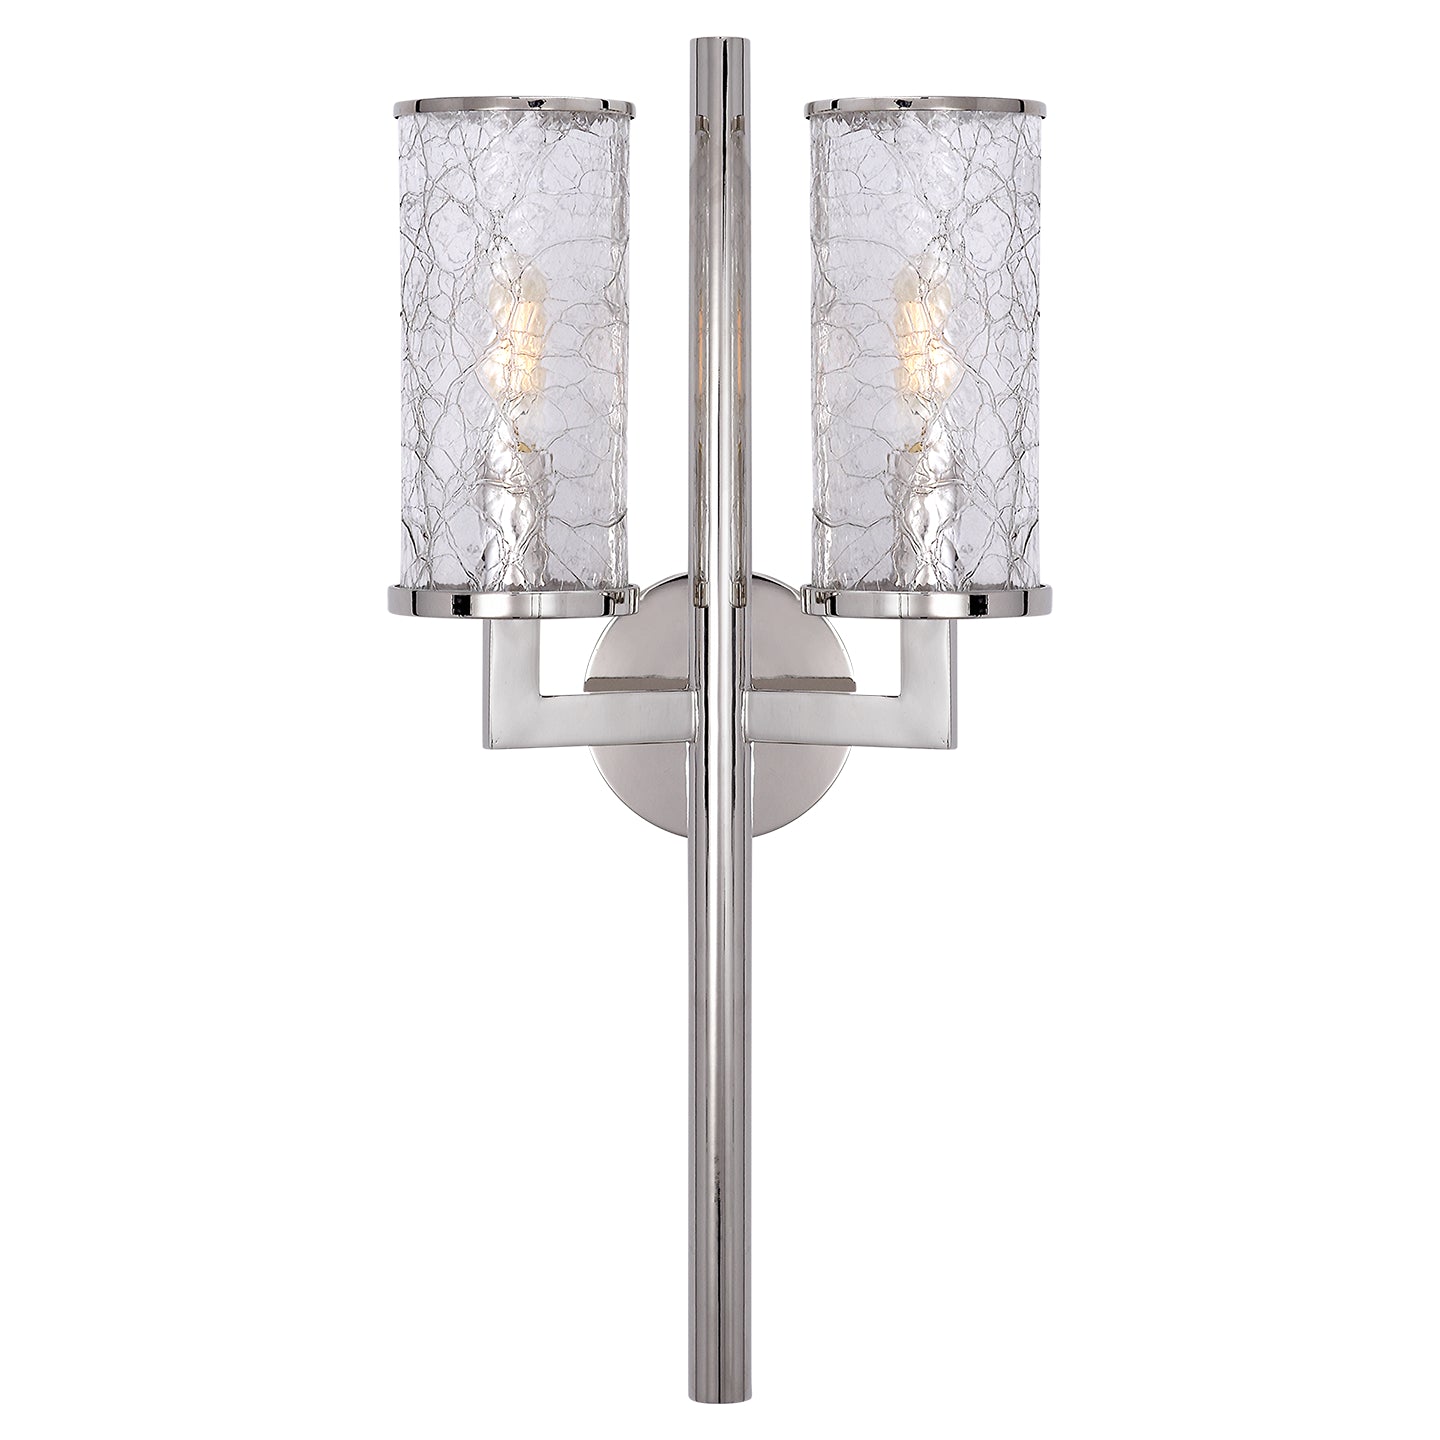 Load image into Gallery viewer, Visual Comfort Signature - KW 2201PN-CRG - Two Light Wall Sconce - Liaison - Polished Nickel
